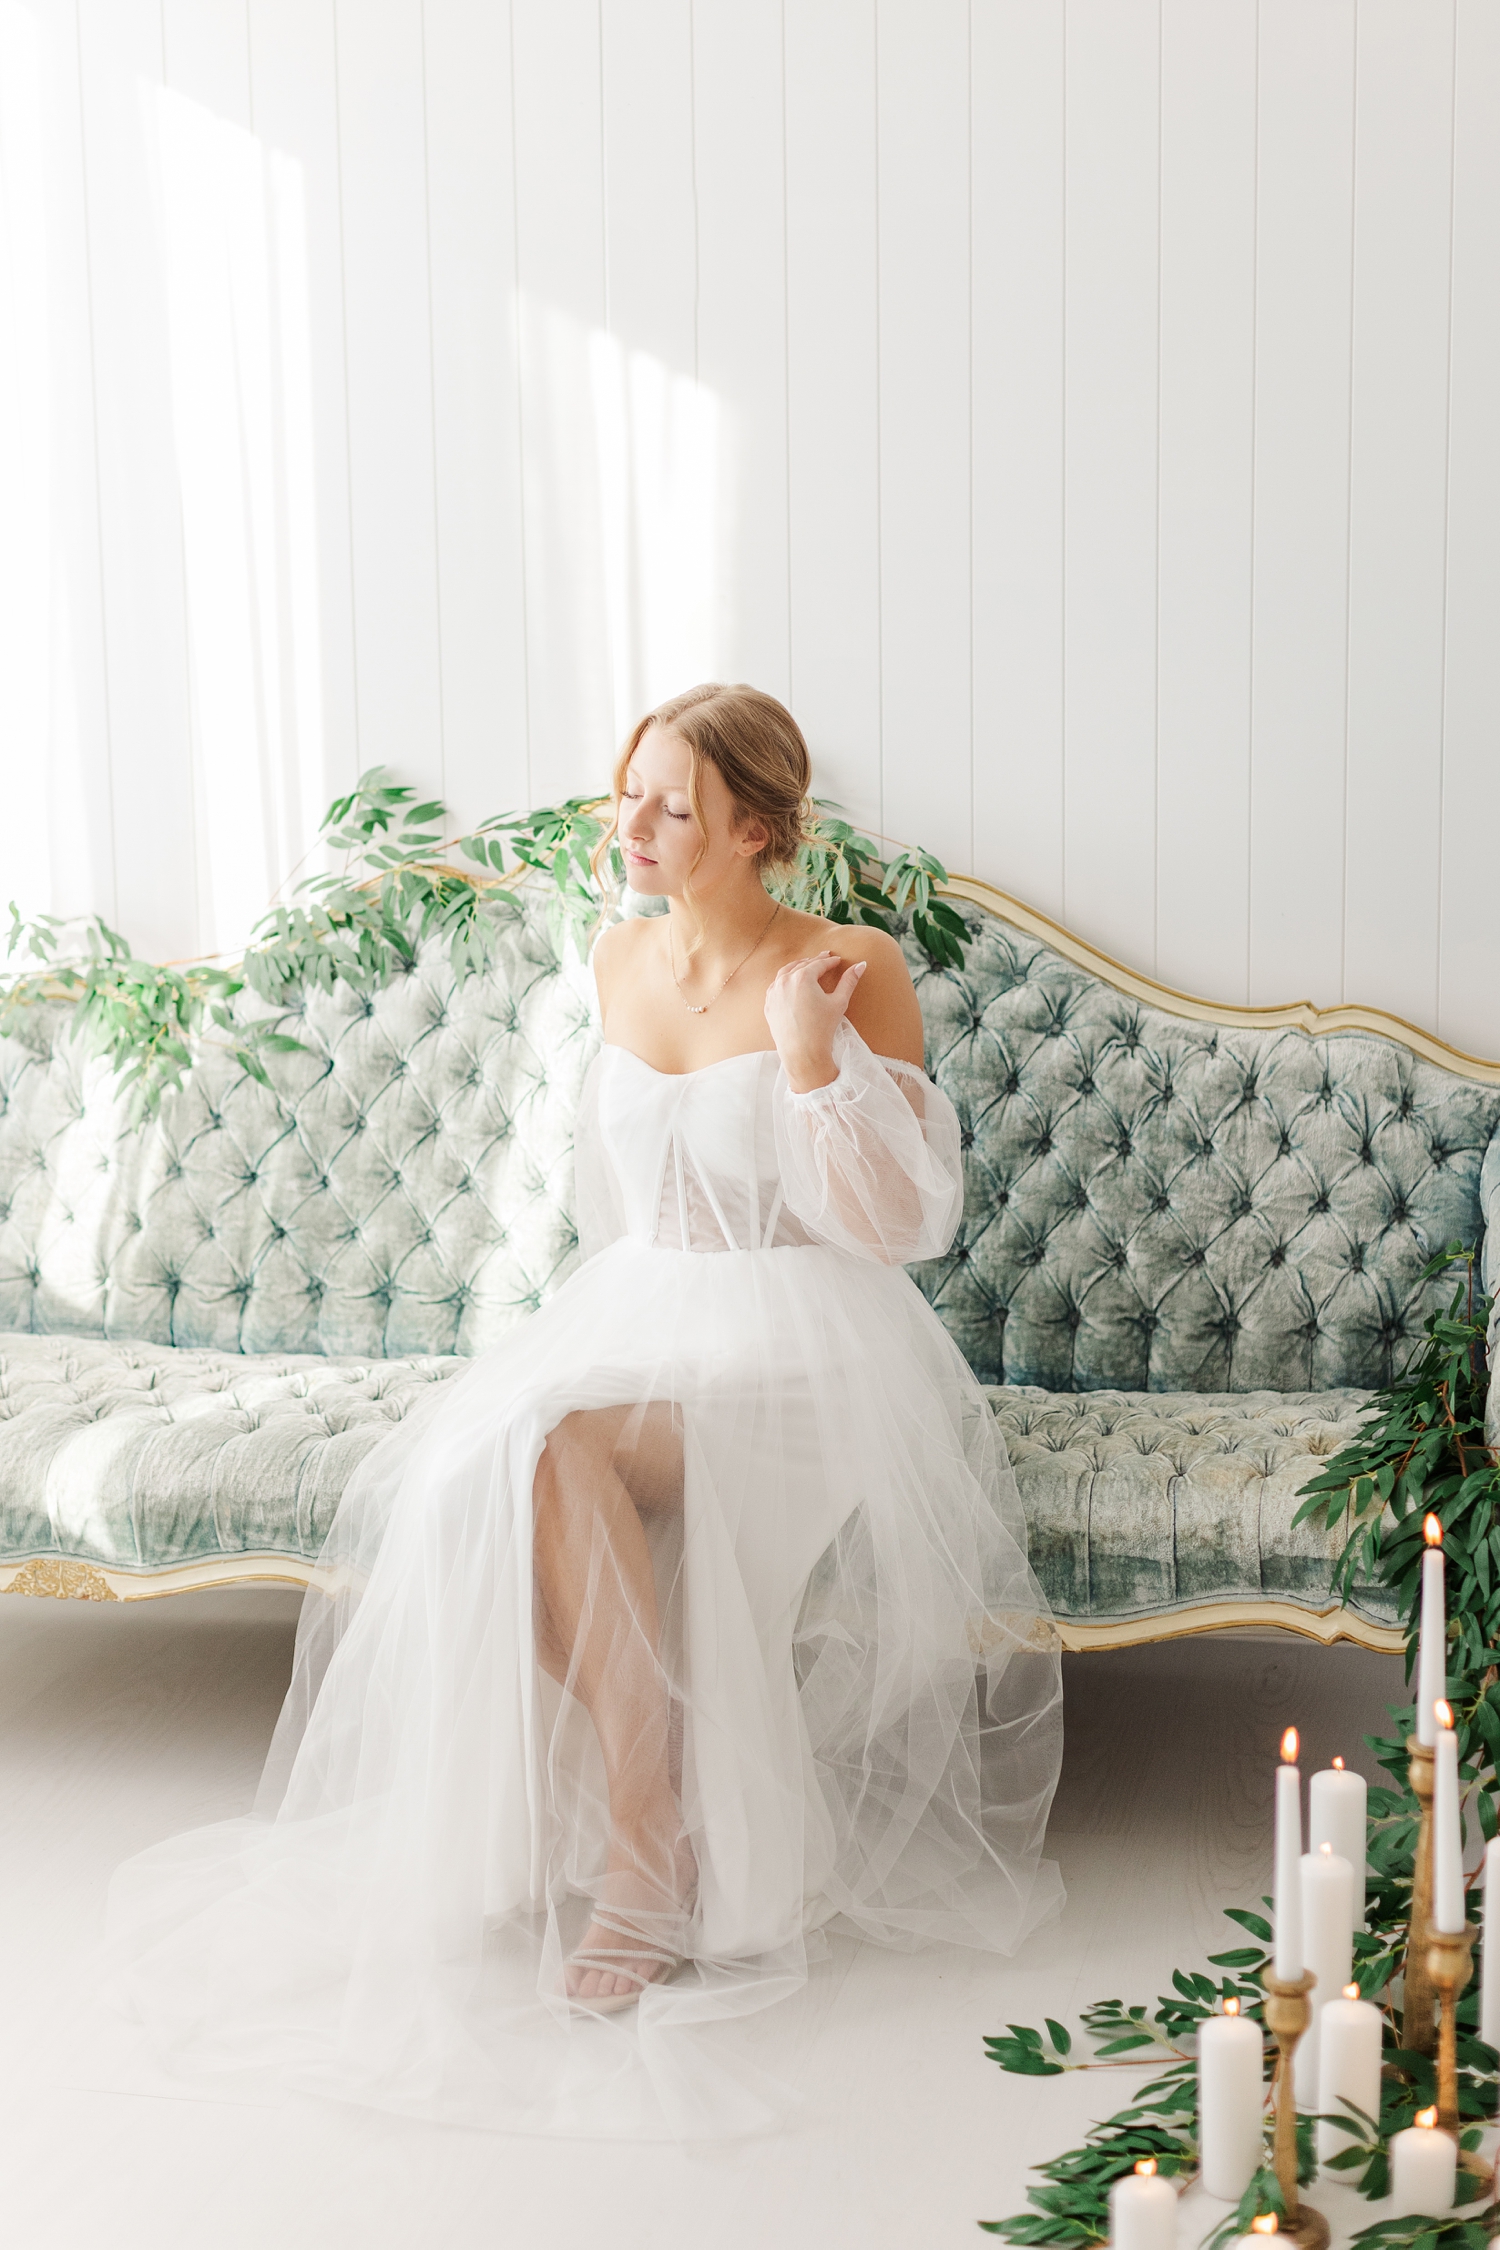 Bride, Ryley dressed in her vintage style wedding gown, gracefully sits on an antique, tufted, blue, victorian style couch draped in greenery | CB Studio